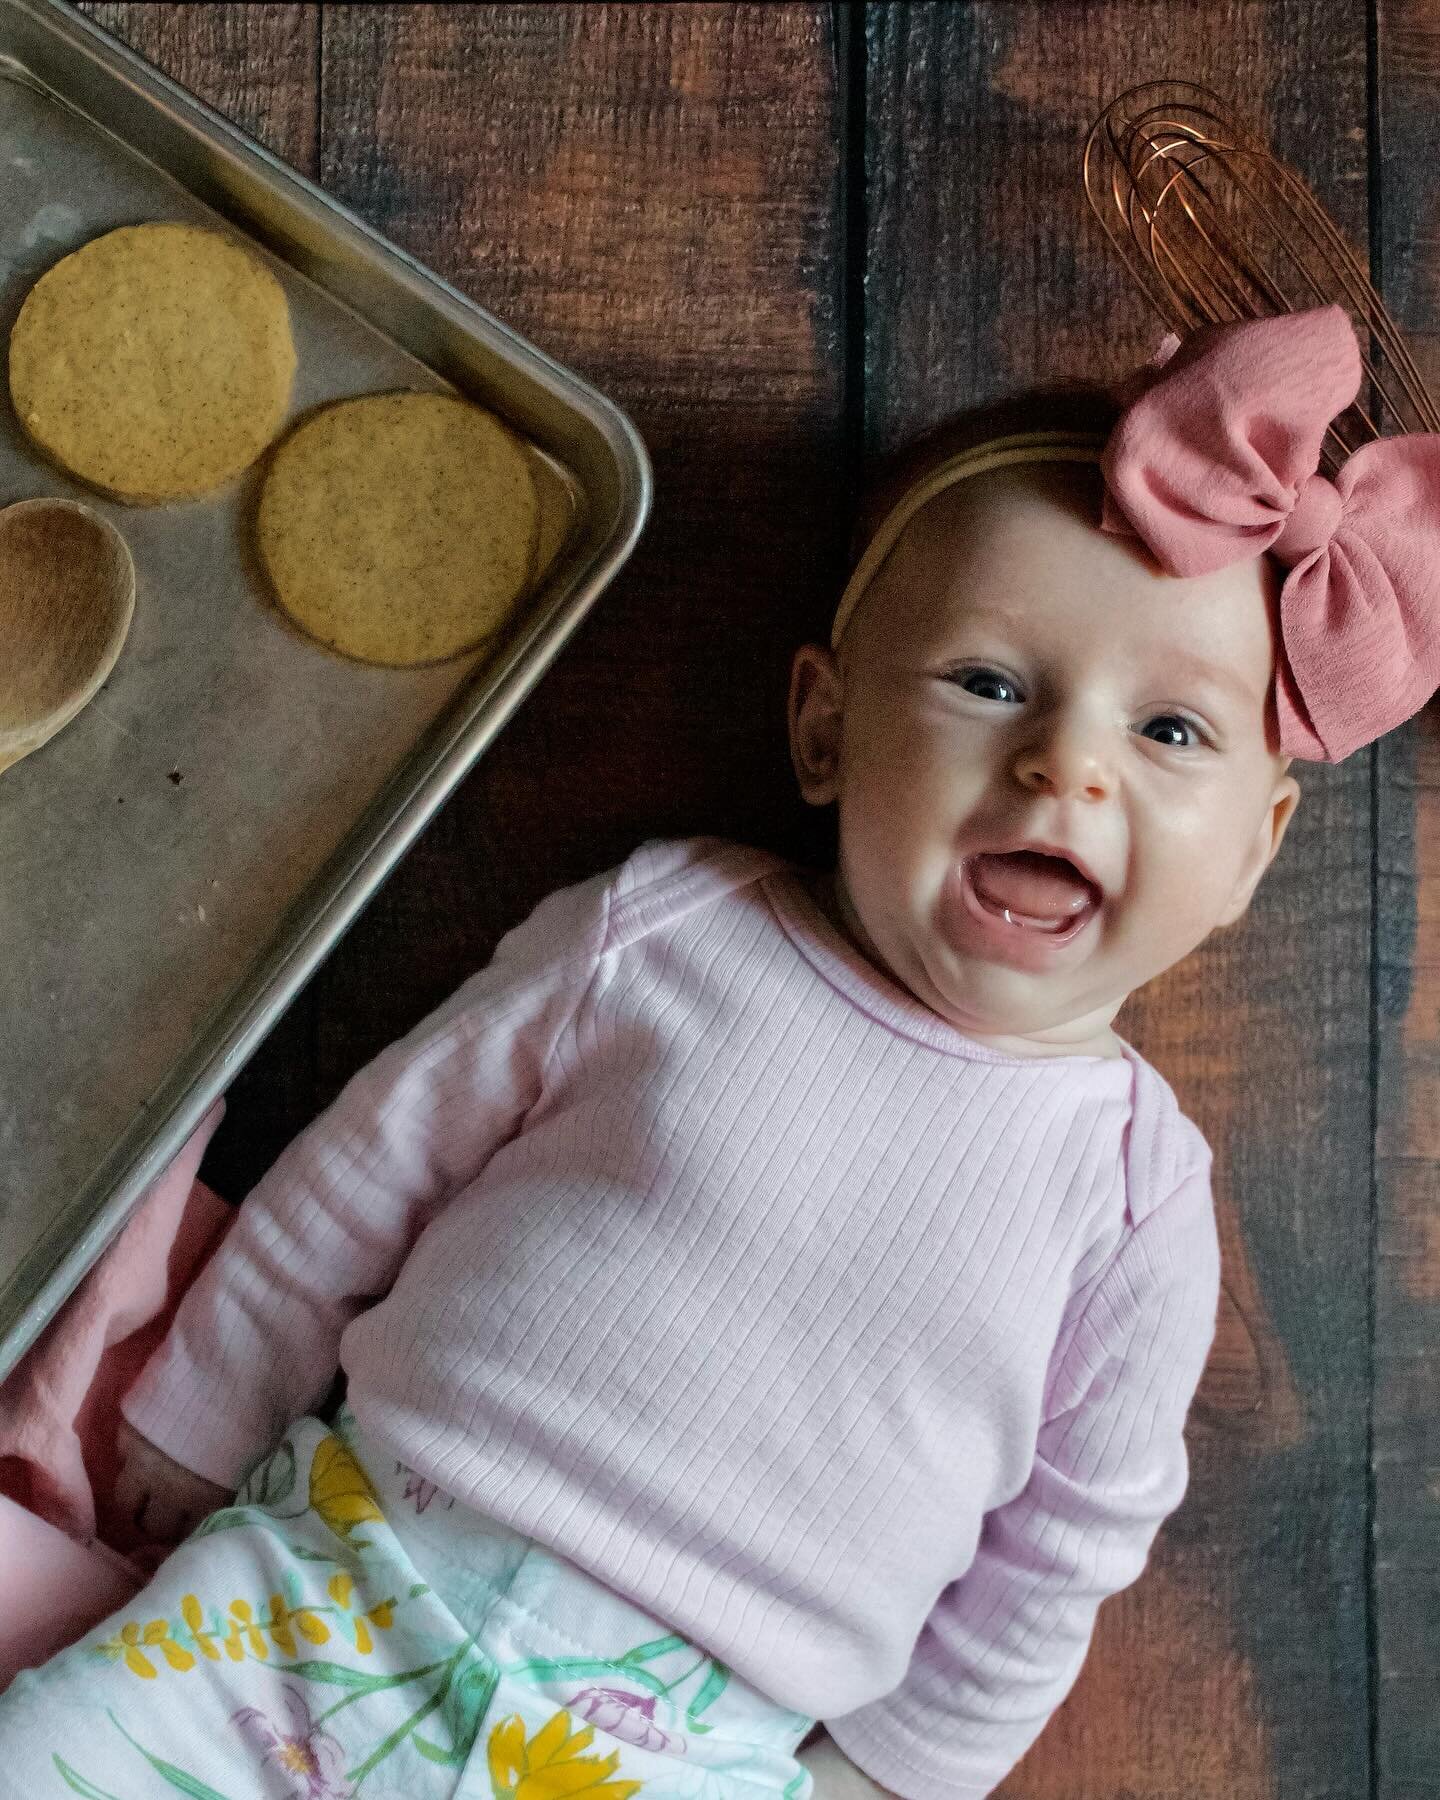 Sleepless nights, endless laundry, and so many smiles: this is two months. To celebrate, I revamped my shortbread and made browned butter shortbread cookies. SOOO good! #brownedbutter #brownbutter #shortbread

Our beautiful little girl is still a tou